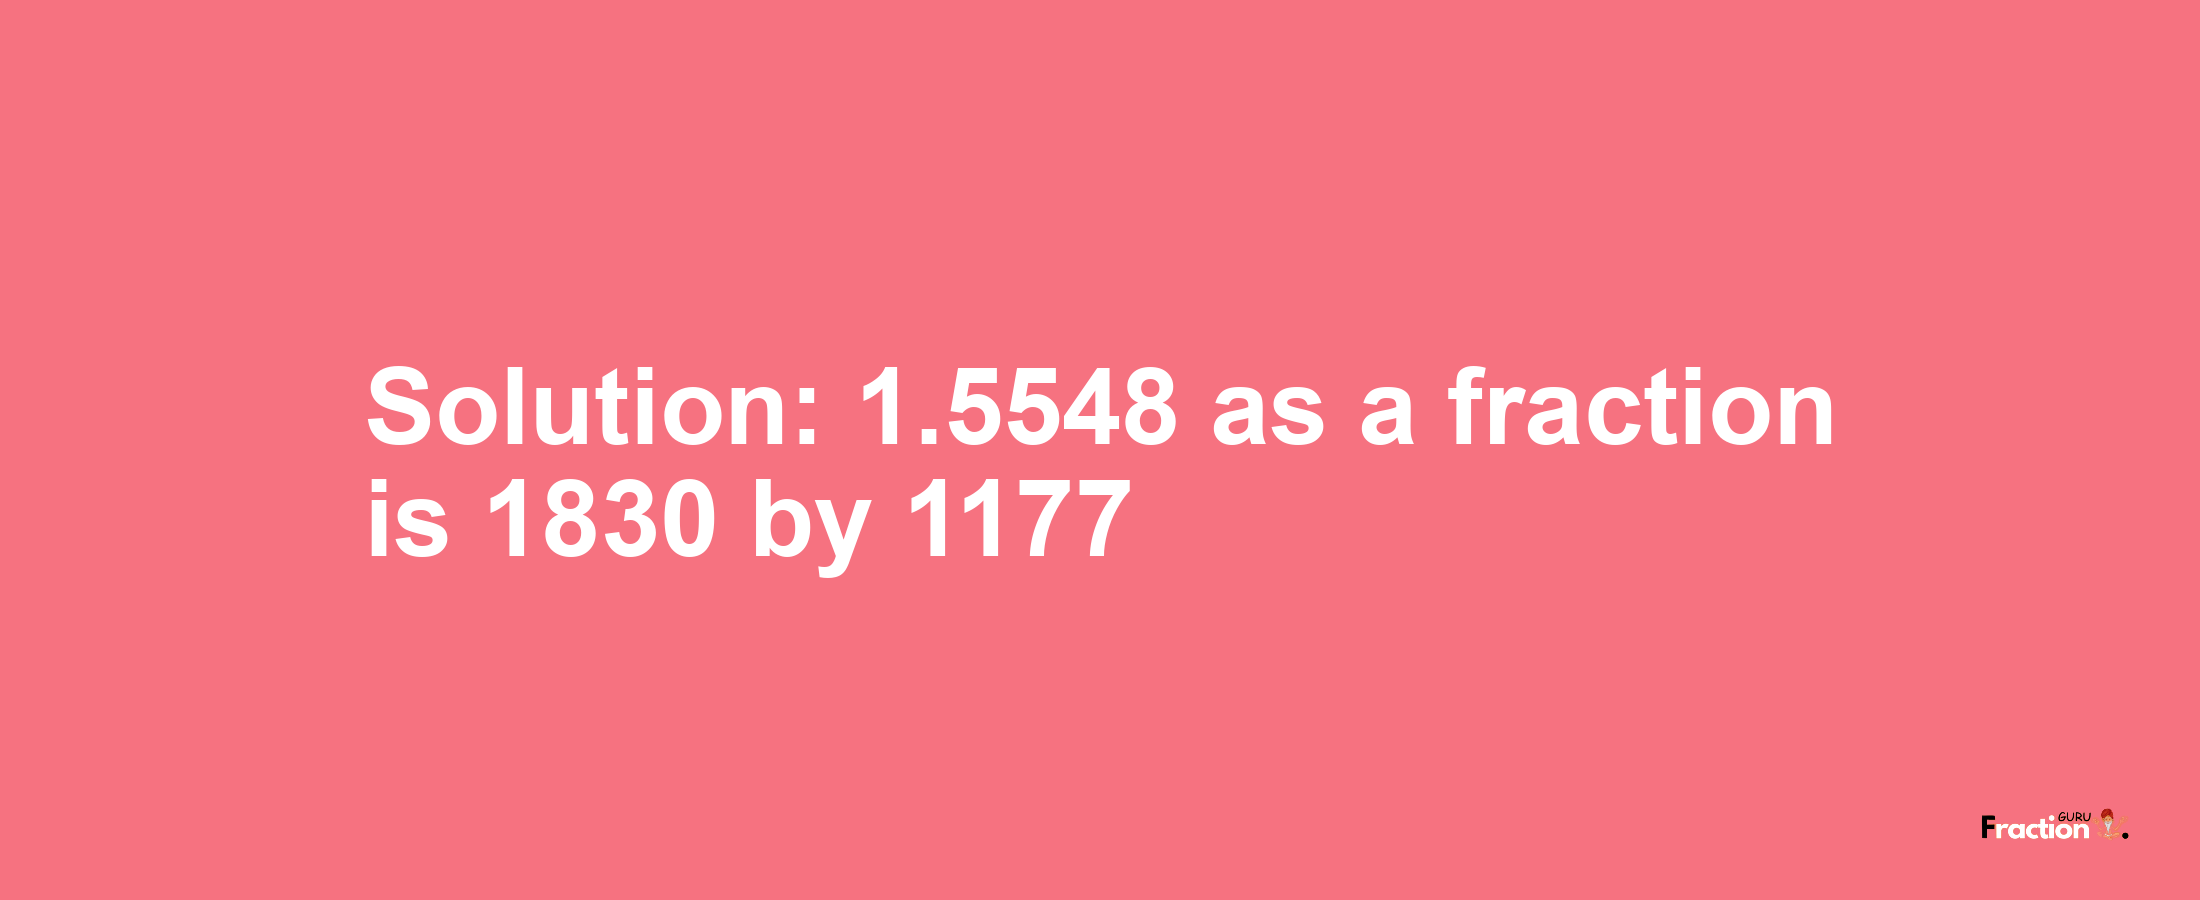 Solution:1.5548 as a fraction is 1830/1177